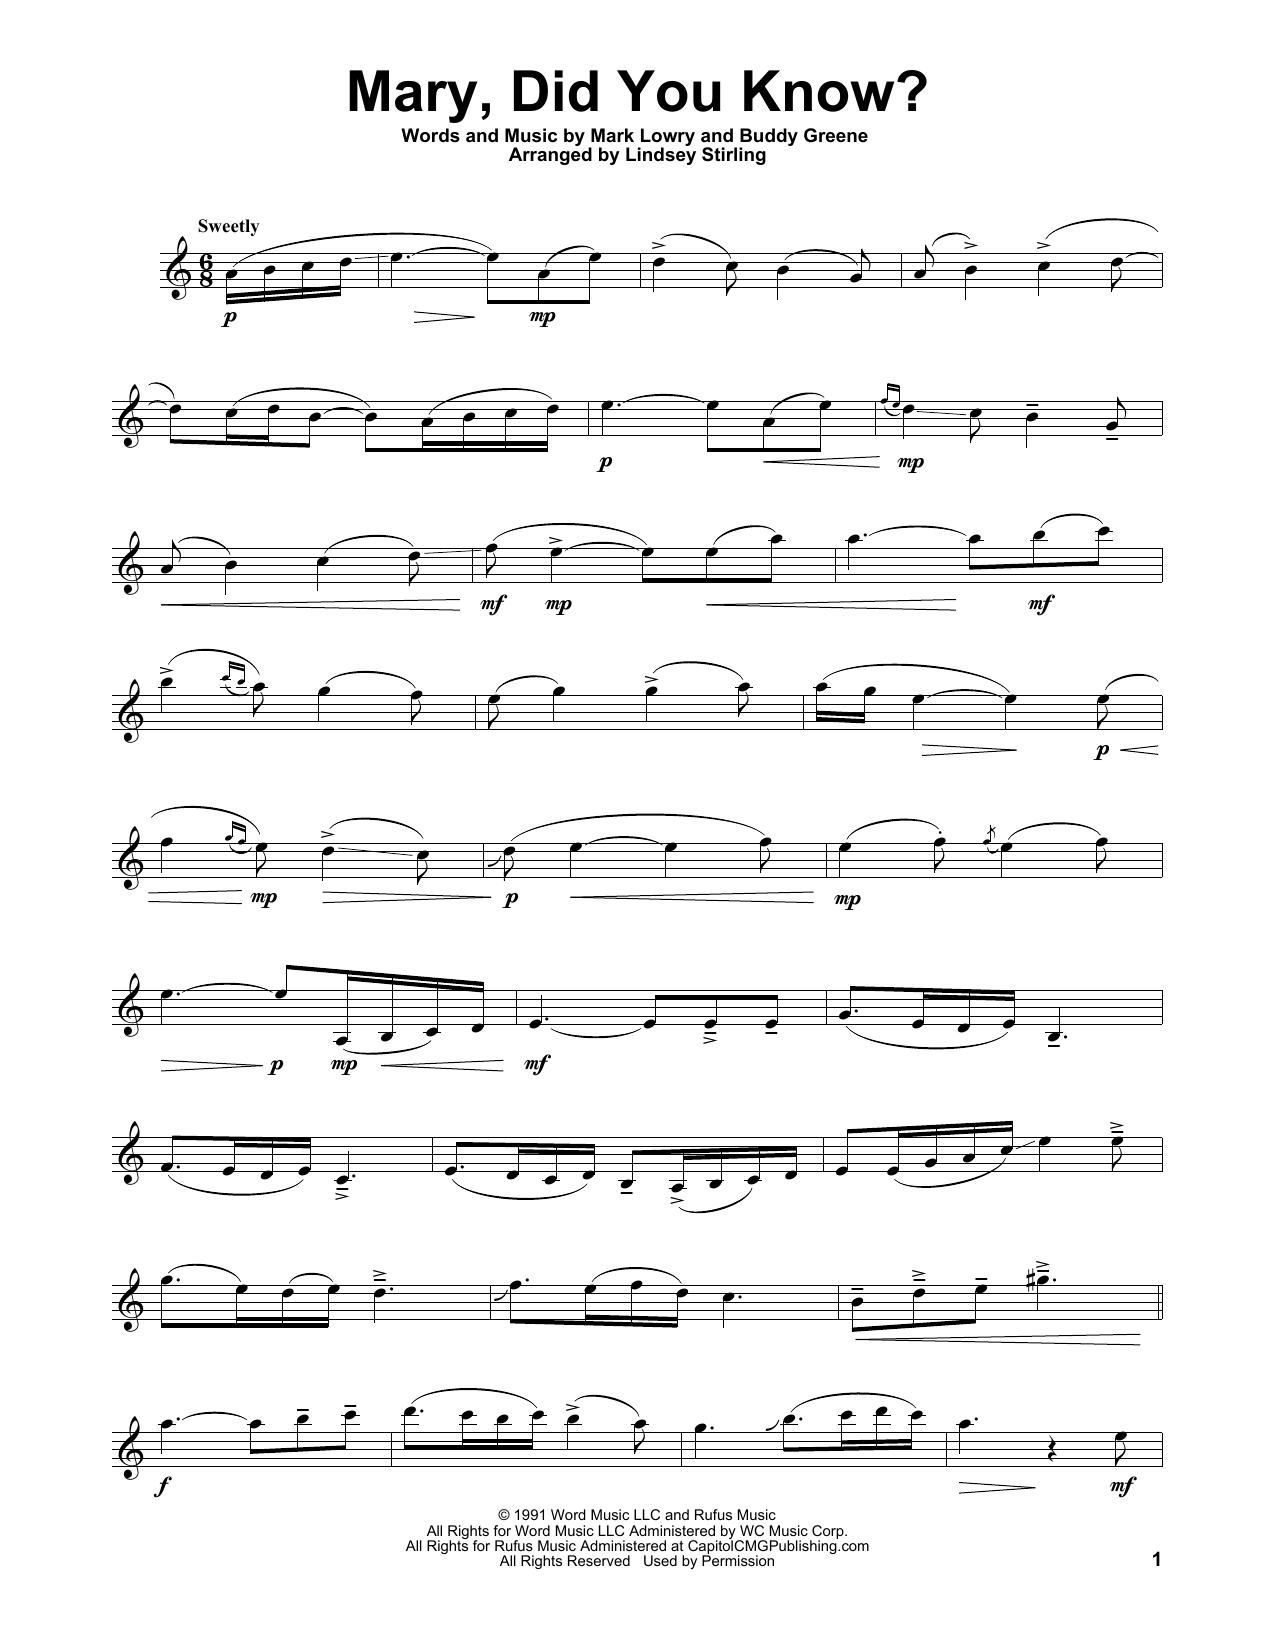 Download Lindsey Stirling Mary, Did You Know? Sheet Music